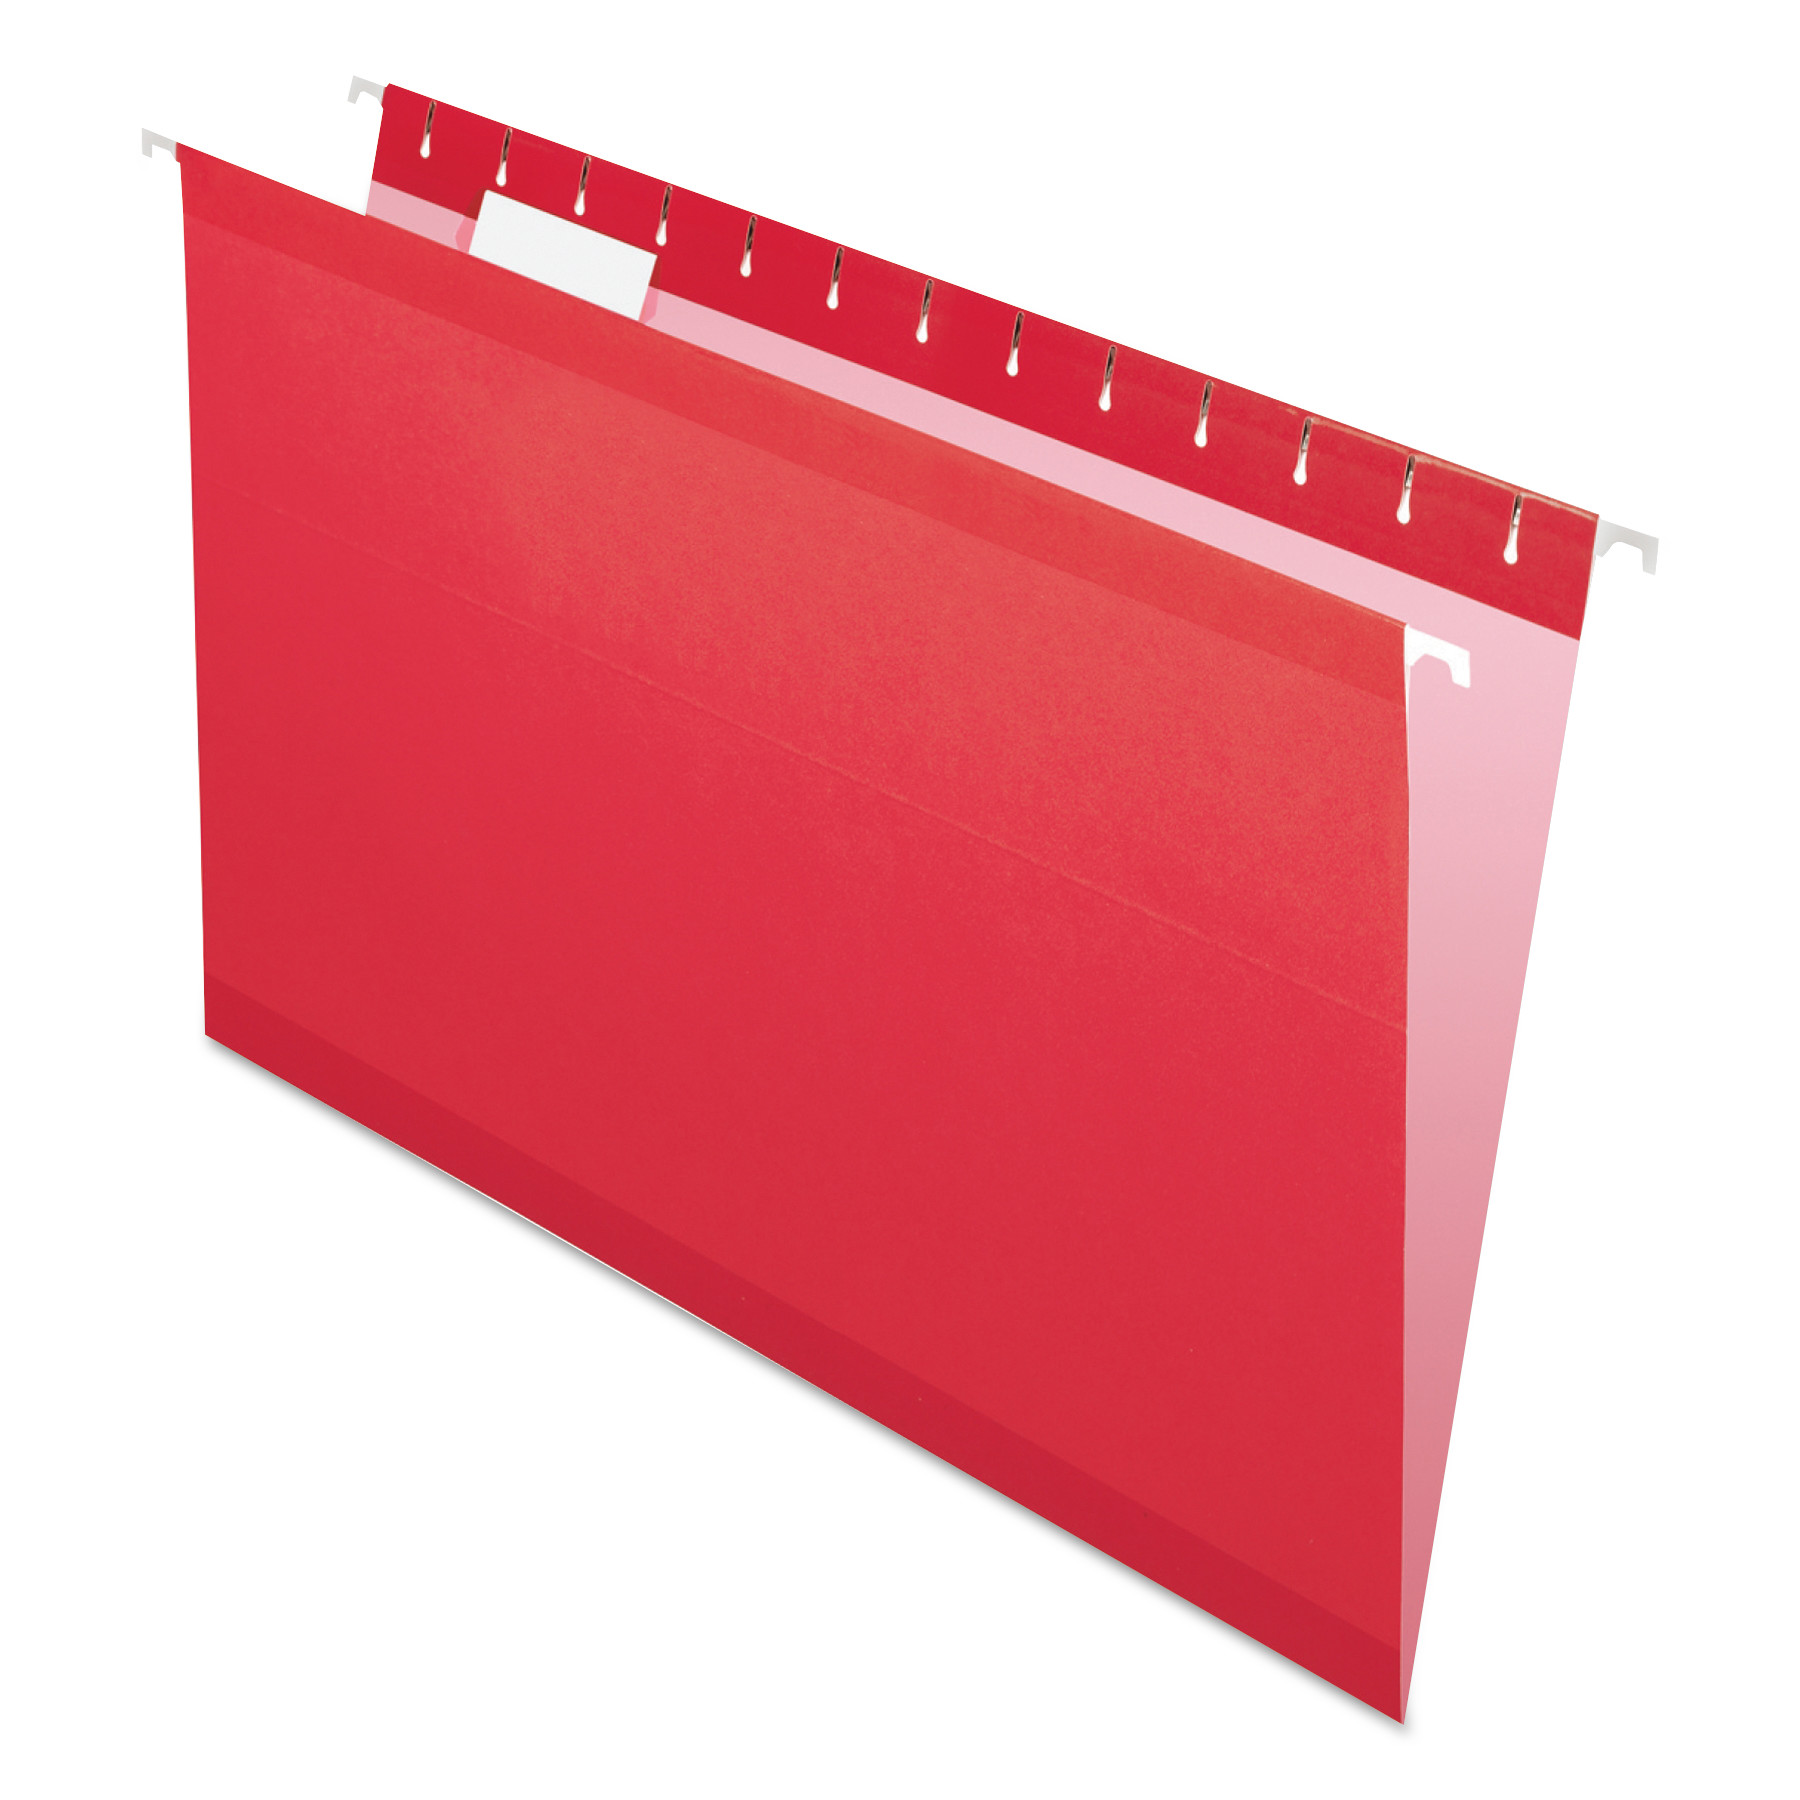  Pendaflex 04153 1/5 RED Colored Reinforced Hanging Folders, Legal Size, 1/5-Cut Tab, Red, 25/Box (PFX415315RED) 